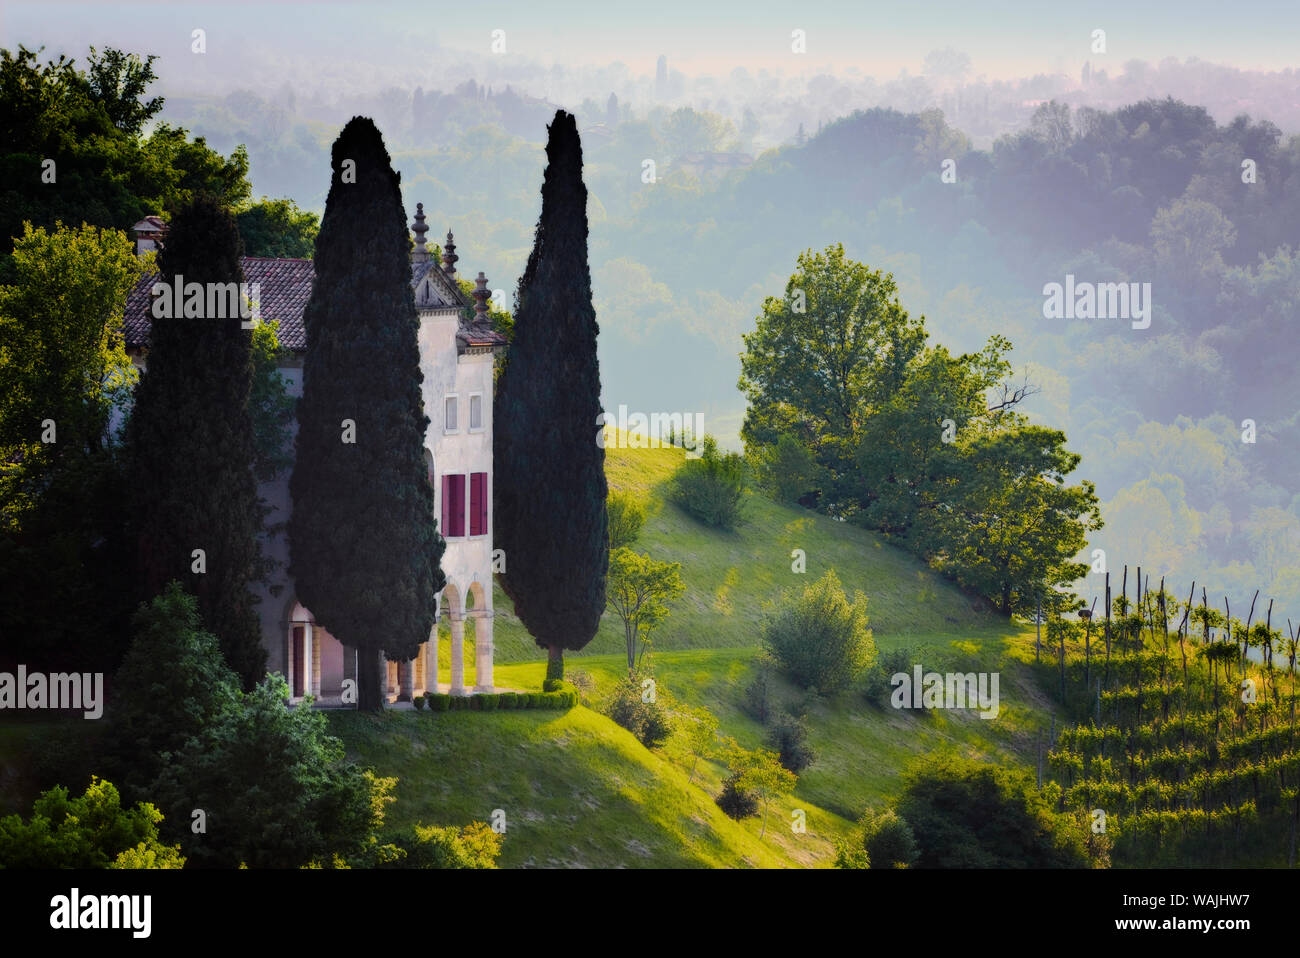 Italy, Veneto, Asolo. Country house and cypress trees. Credit as: Jim Nilsen / Jaynes Gallery / DanitaDelimont.com Stock Photo